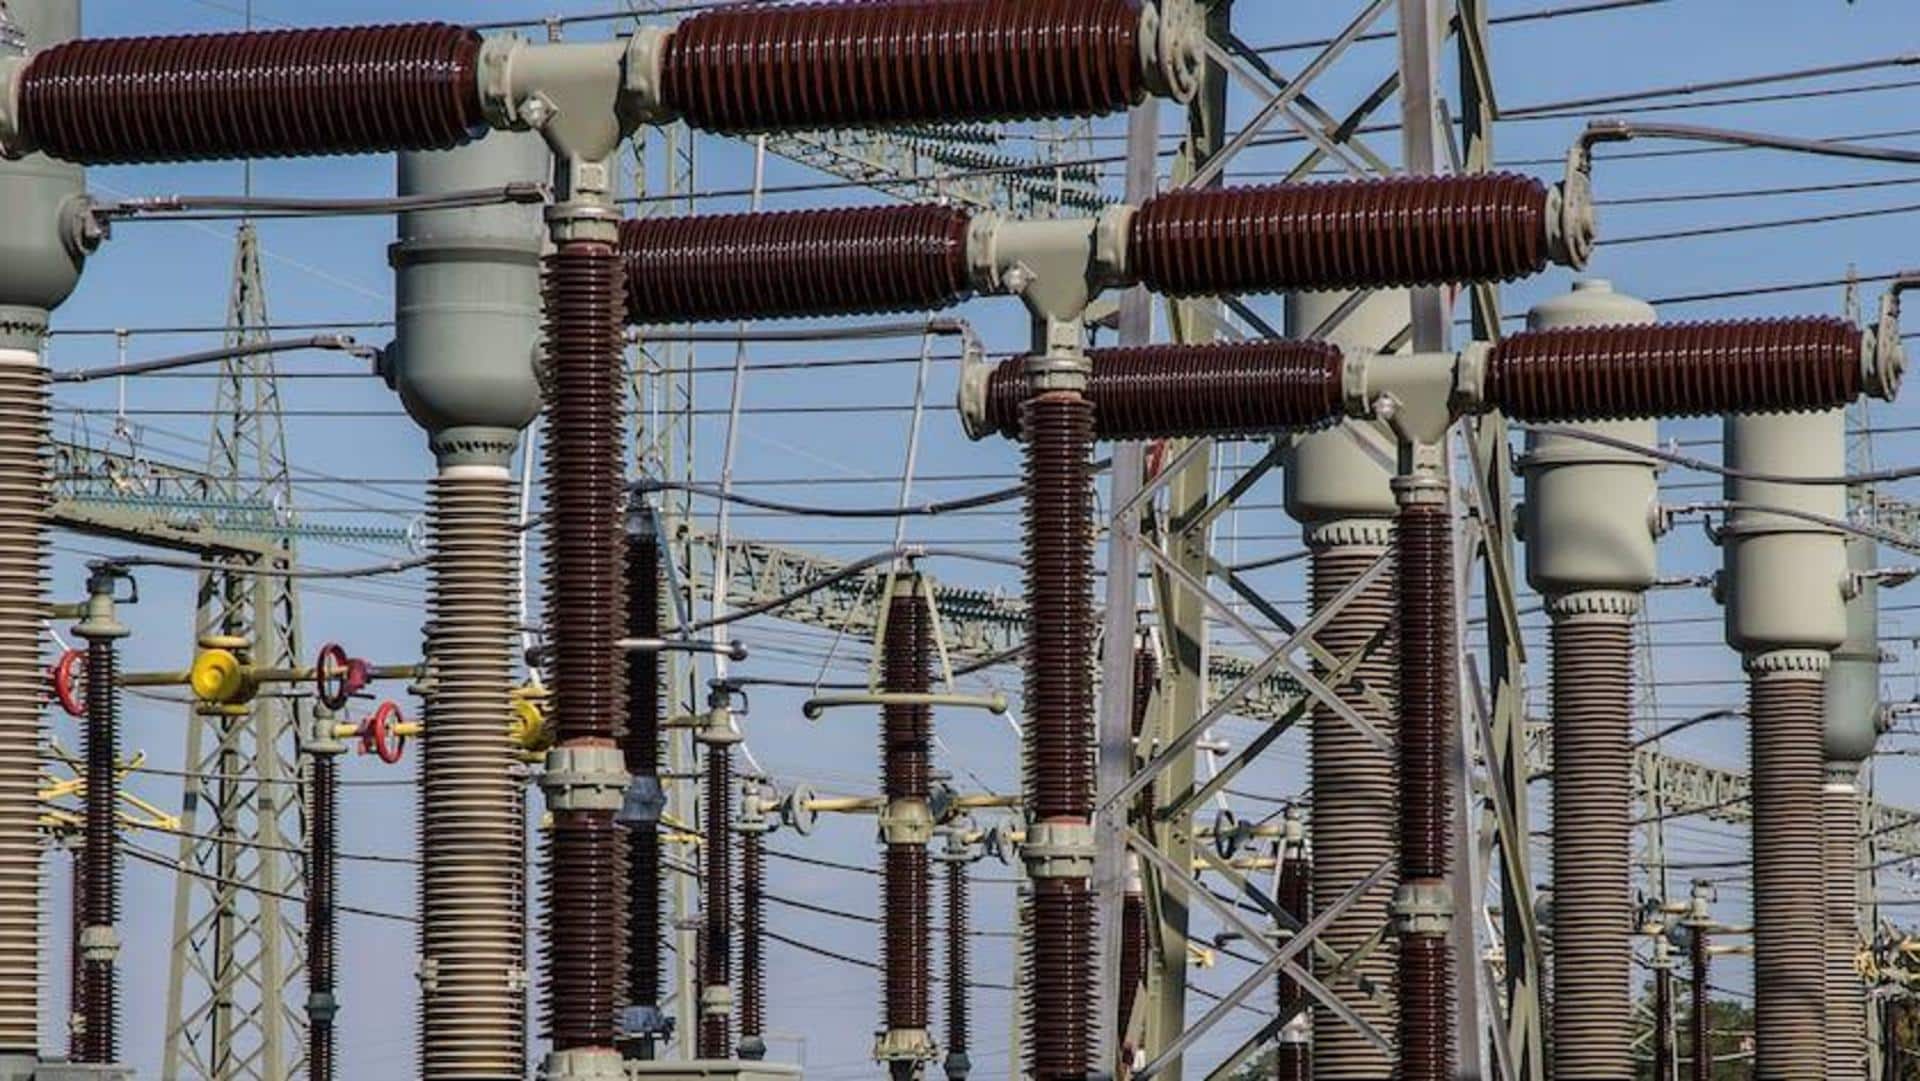 New rules: Power 20% cheaper during day, higher during night